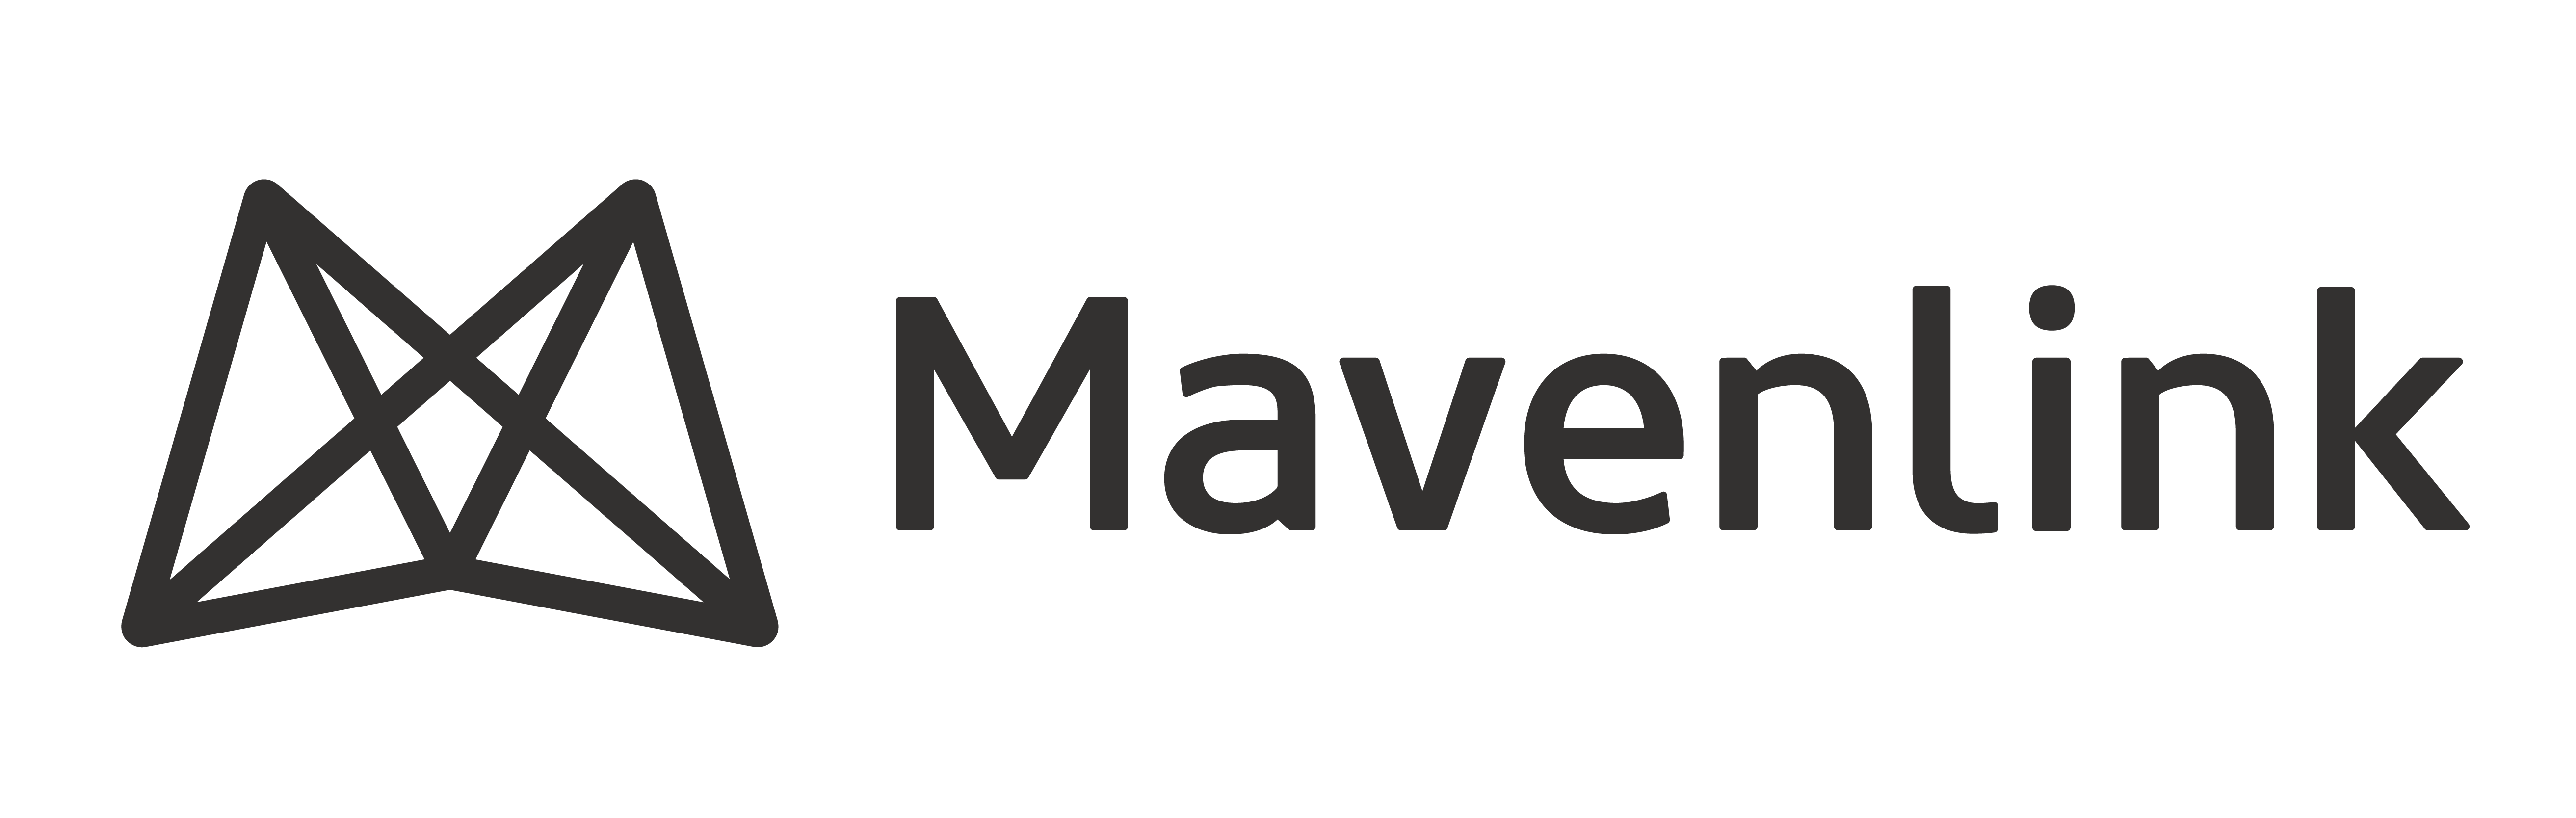 Mavenlink-Logo-Charcoal-Primary (2).png